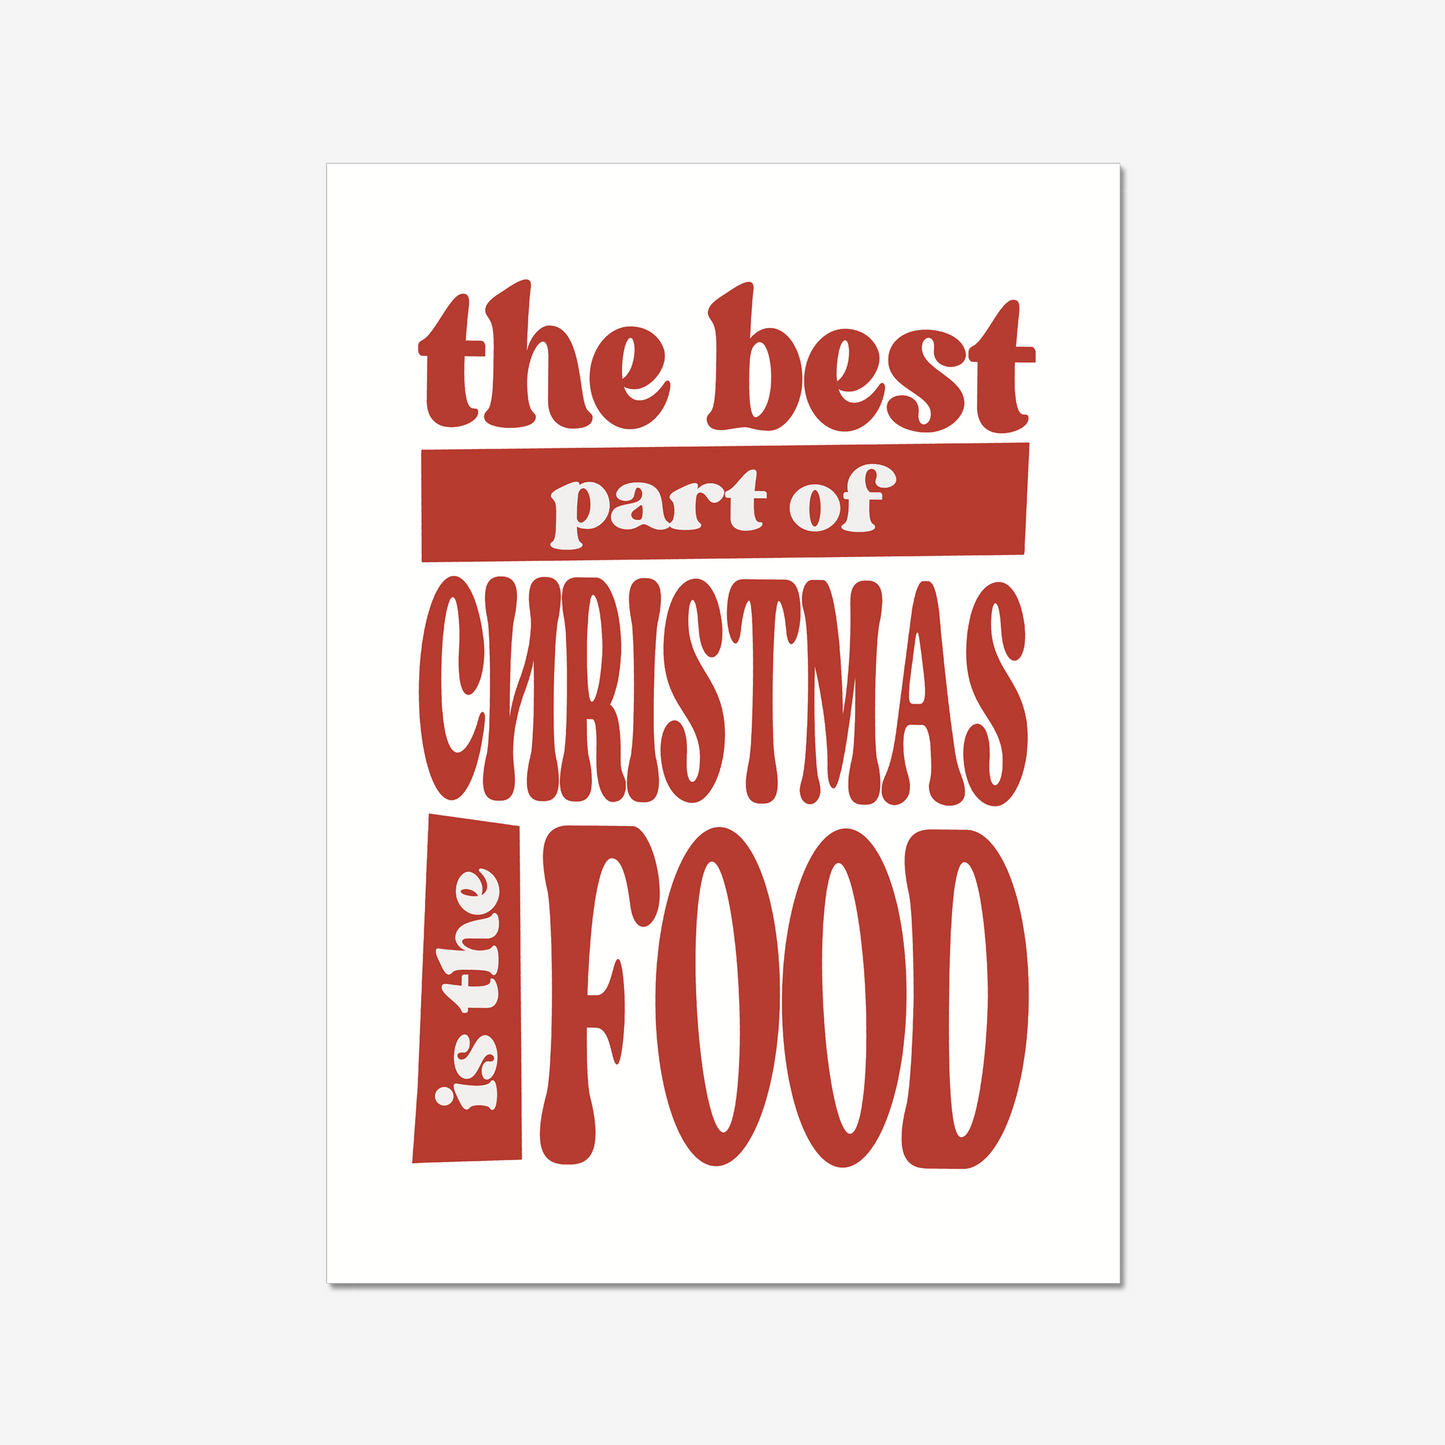 What's the best thing about Christmas? The food, of course! This fun and quirky art print poster features the quote "The best thing about Christmas is the food" in red font. It's perfect for anyone who loves to enjoy all the delicious holiday treats!